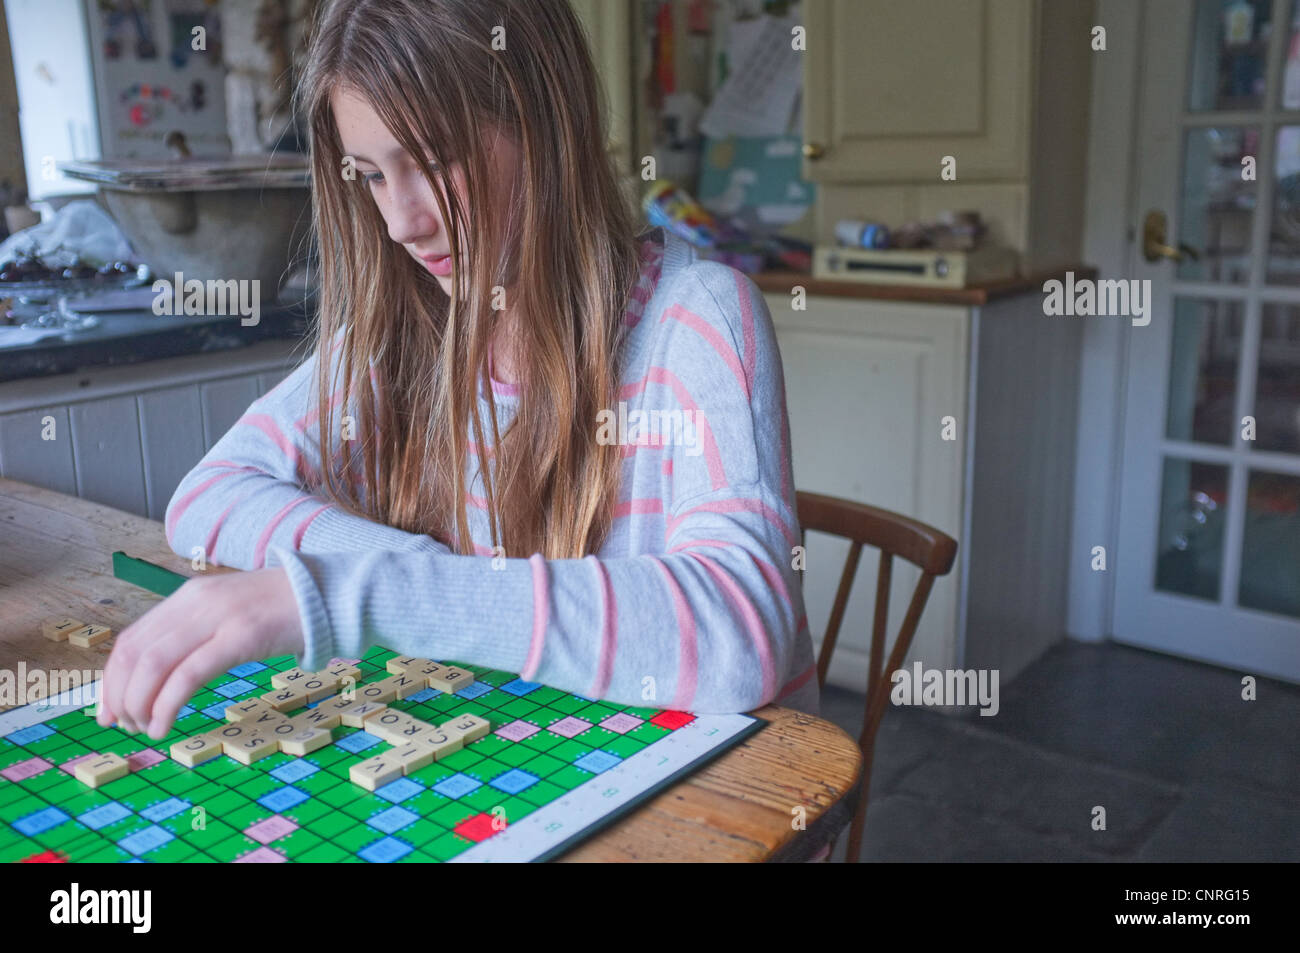 An 11 year old girl playing Scrabble in a kitchen Stock Photo